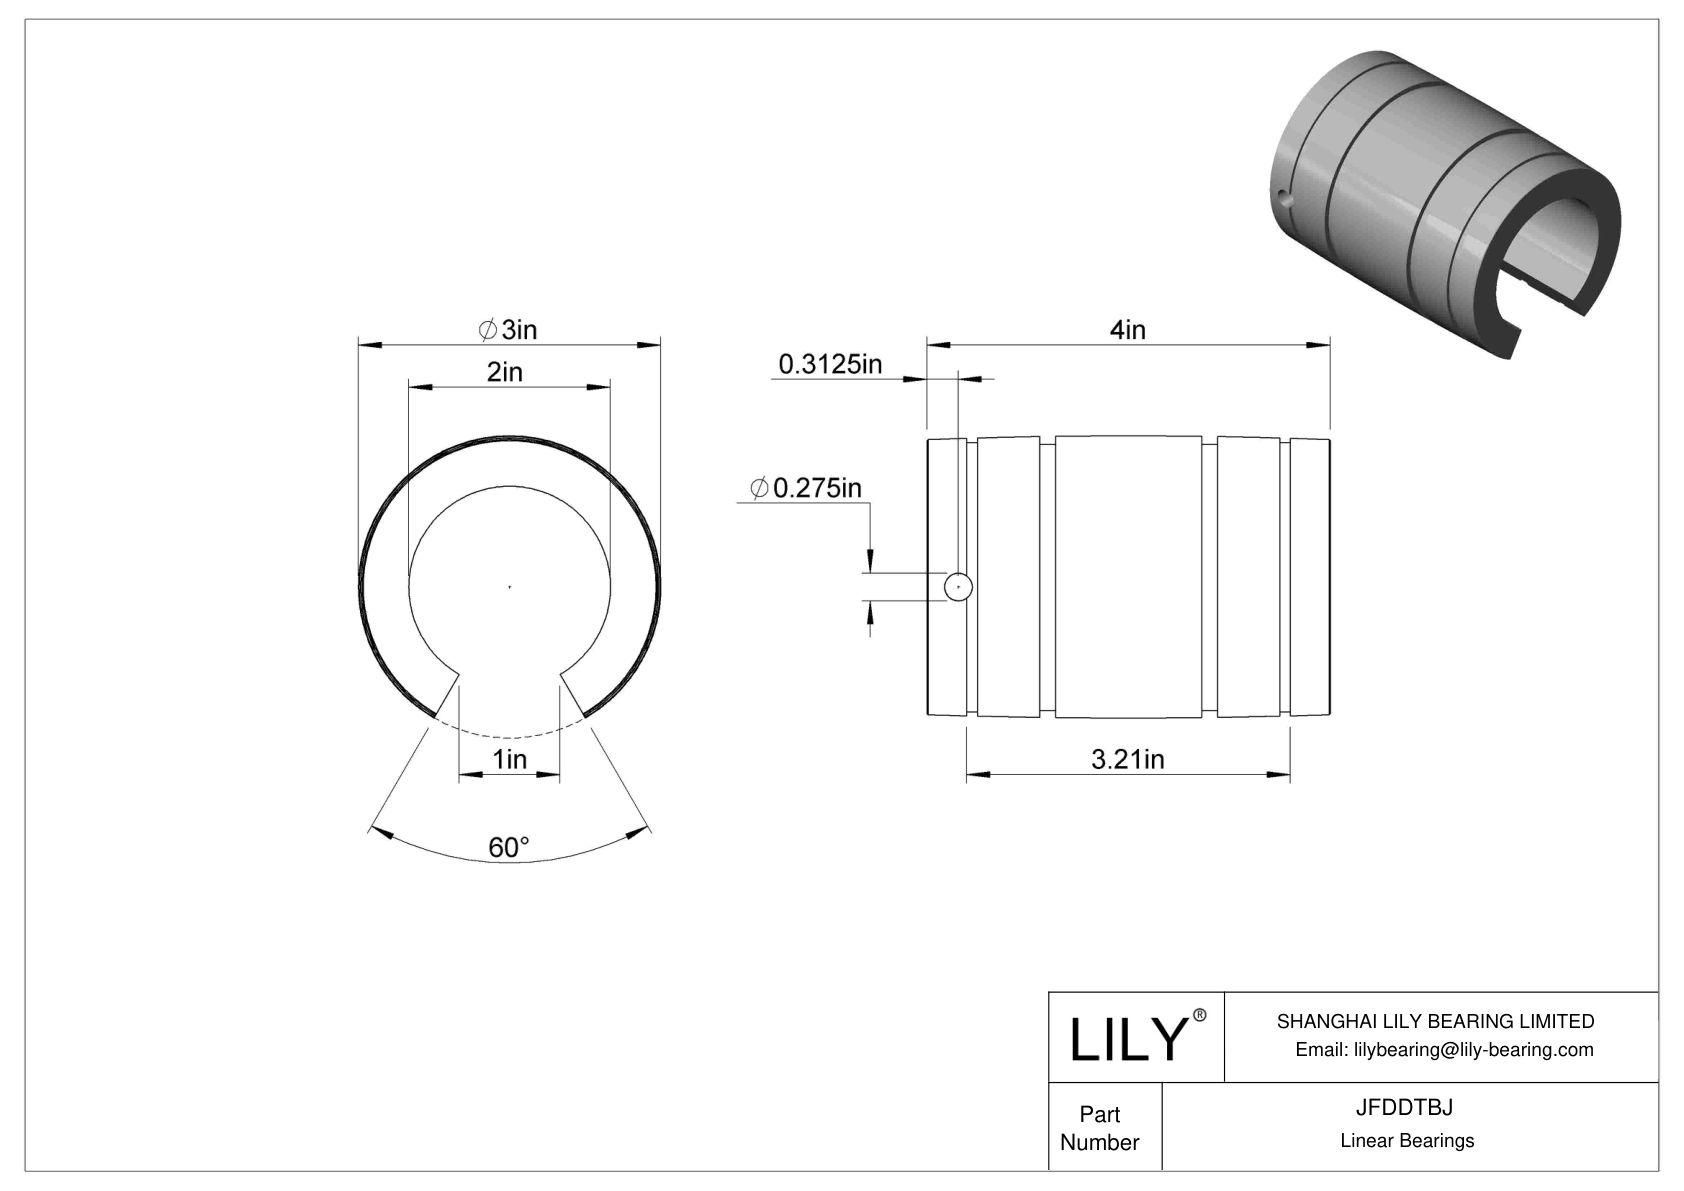 JFDDTBJ Common Linear Sleeve Bearings for Support Rail Shafts cad drawing